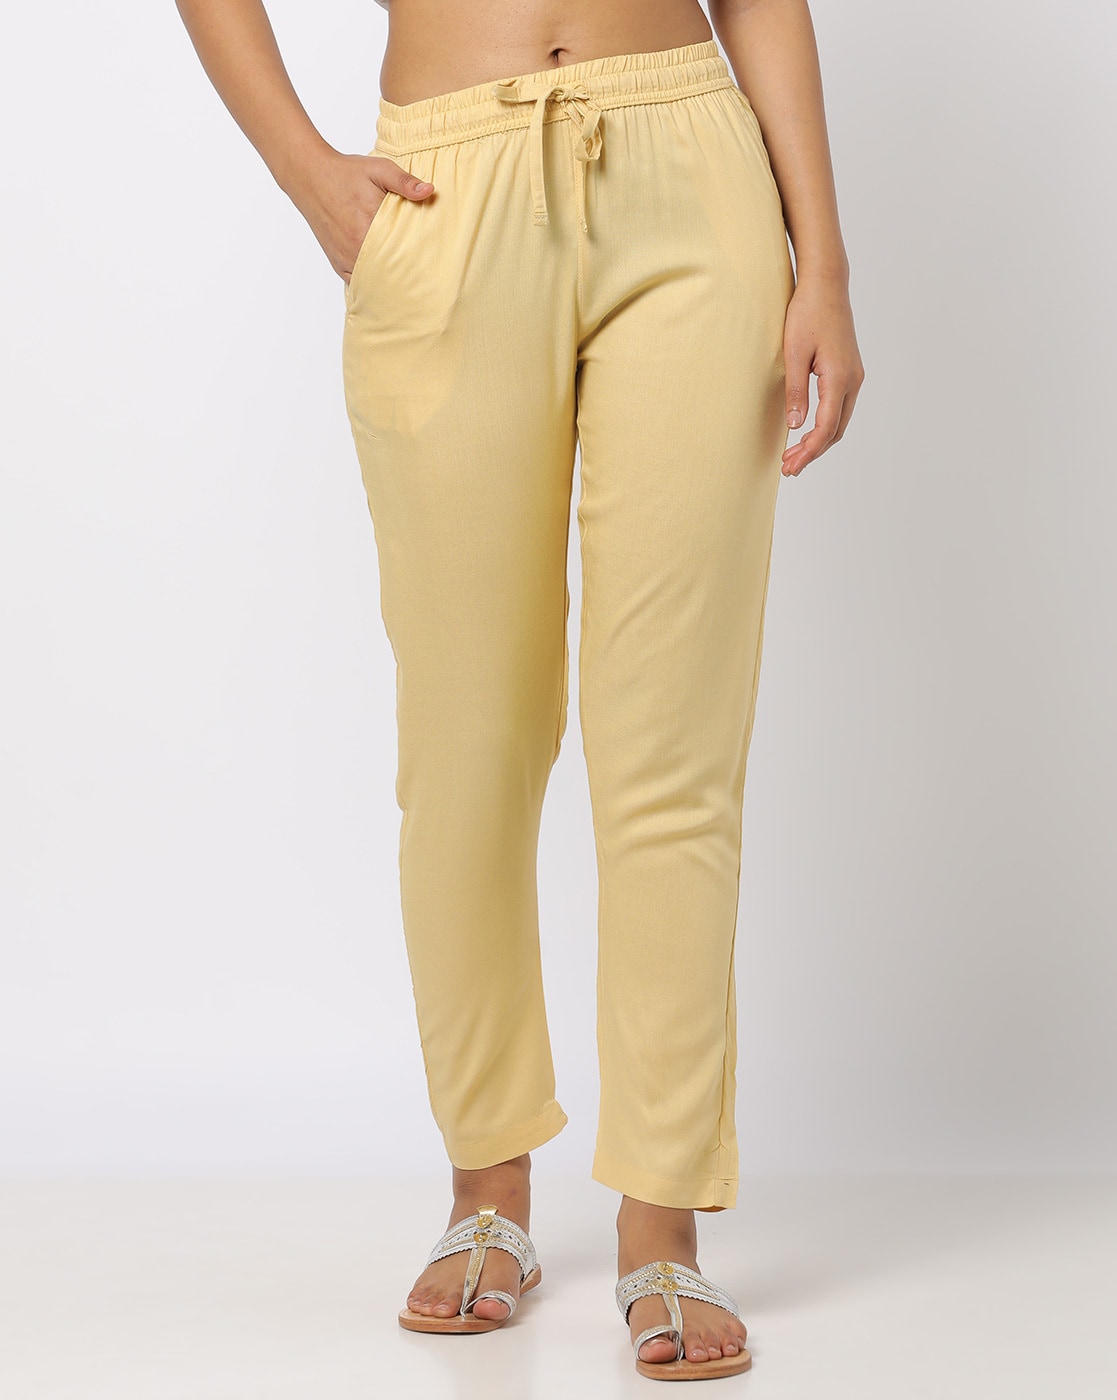 Buy Cream and Beige Combo of 2 Women Straight Trousers Cotton for Best  Price, Reviews, Free Shipping